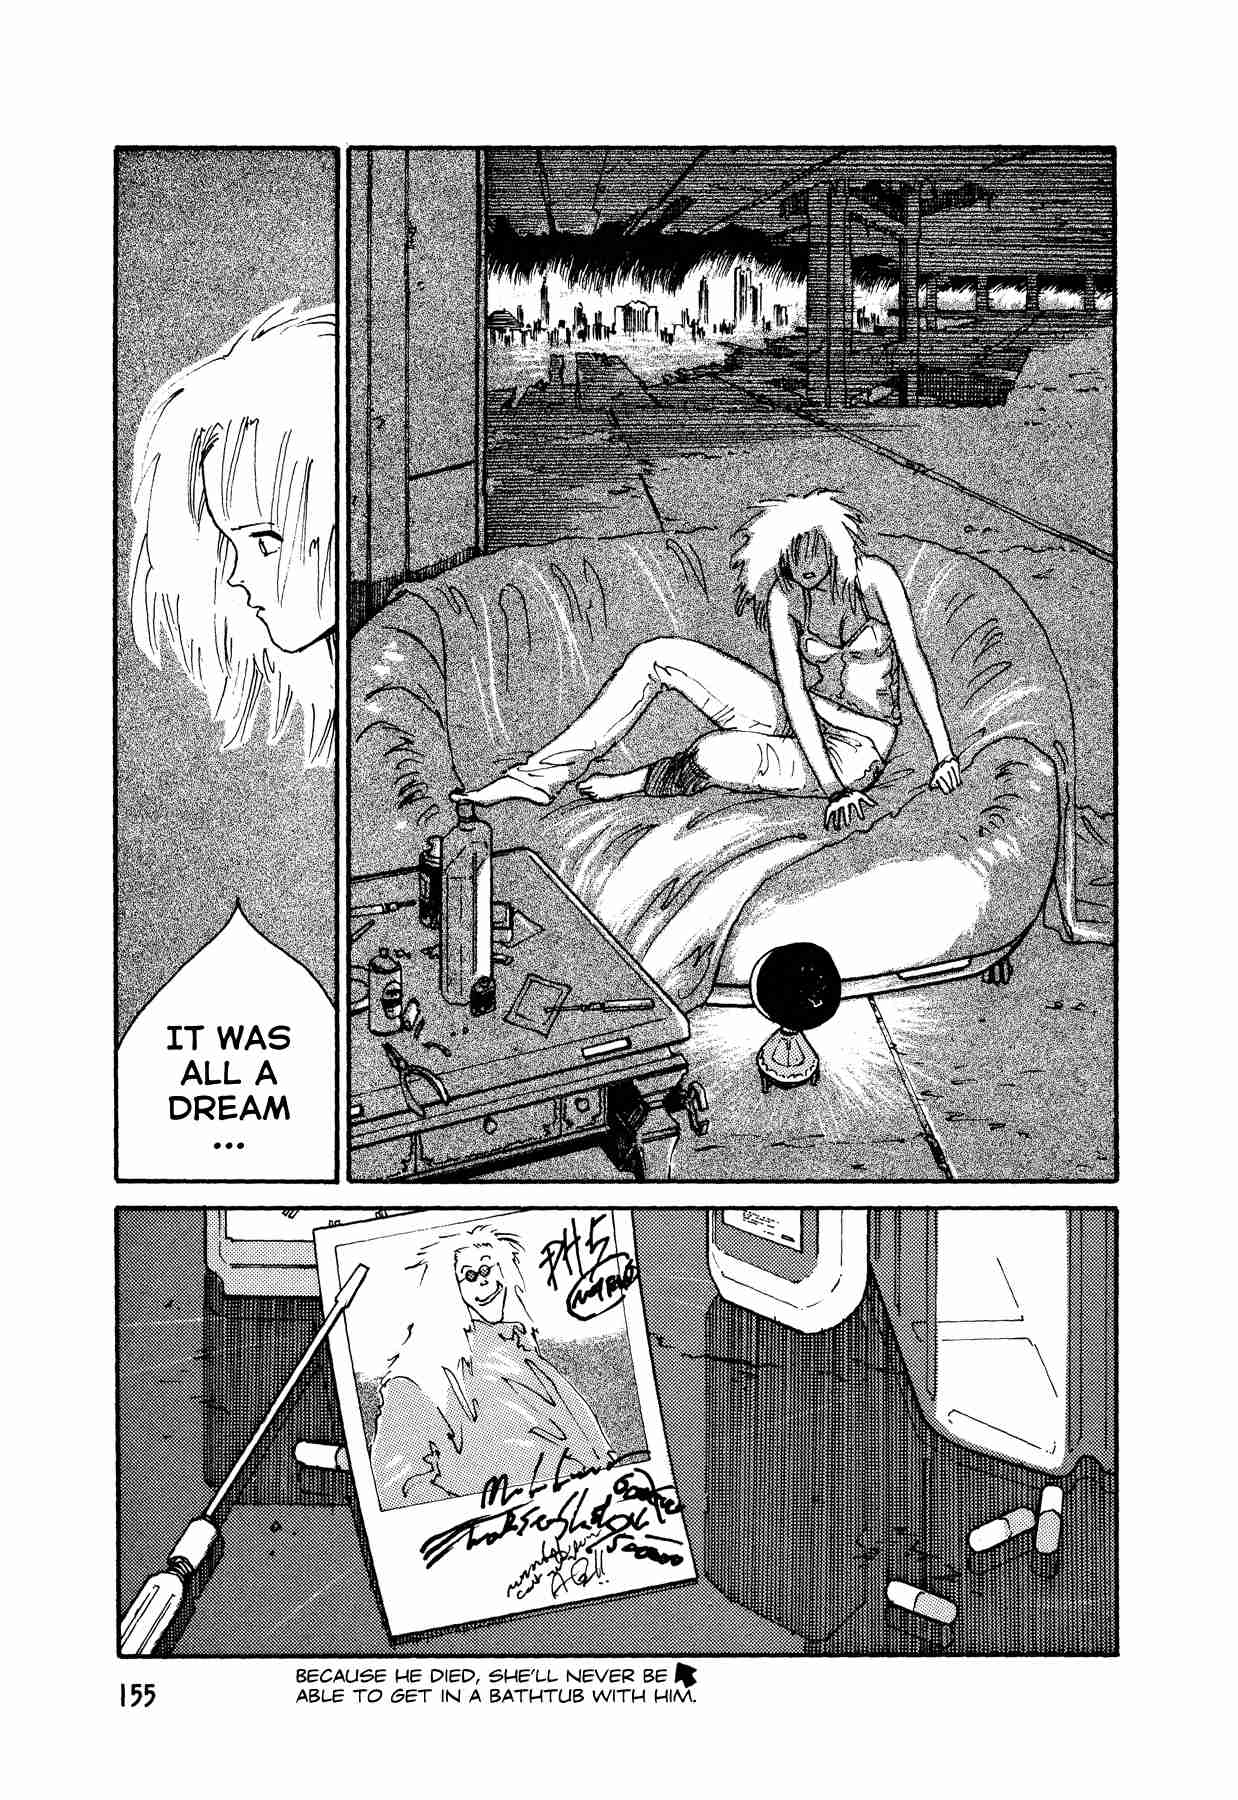 Armitage III Vol. 2 Ch. 11 A Day After